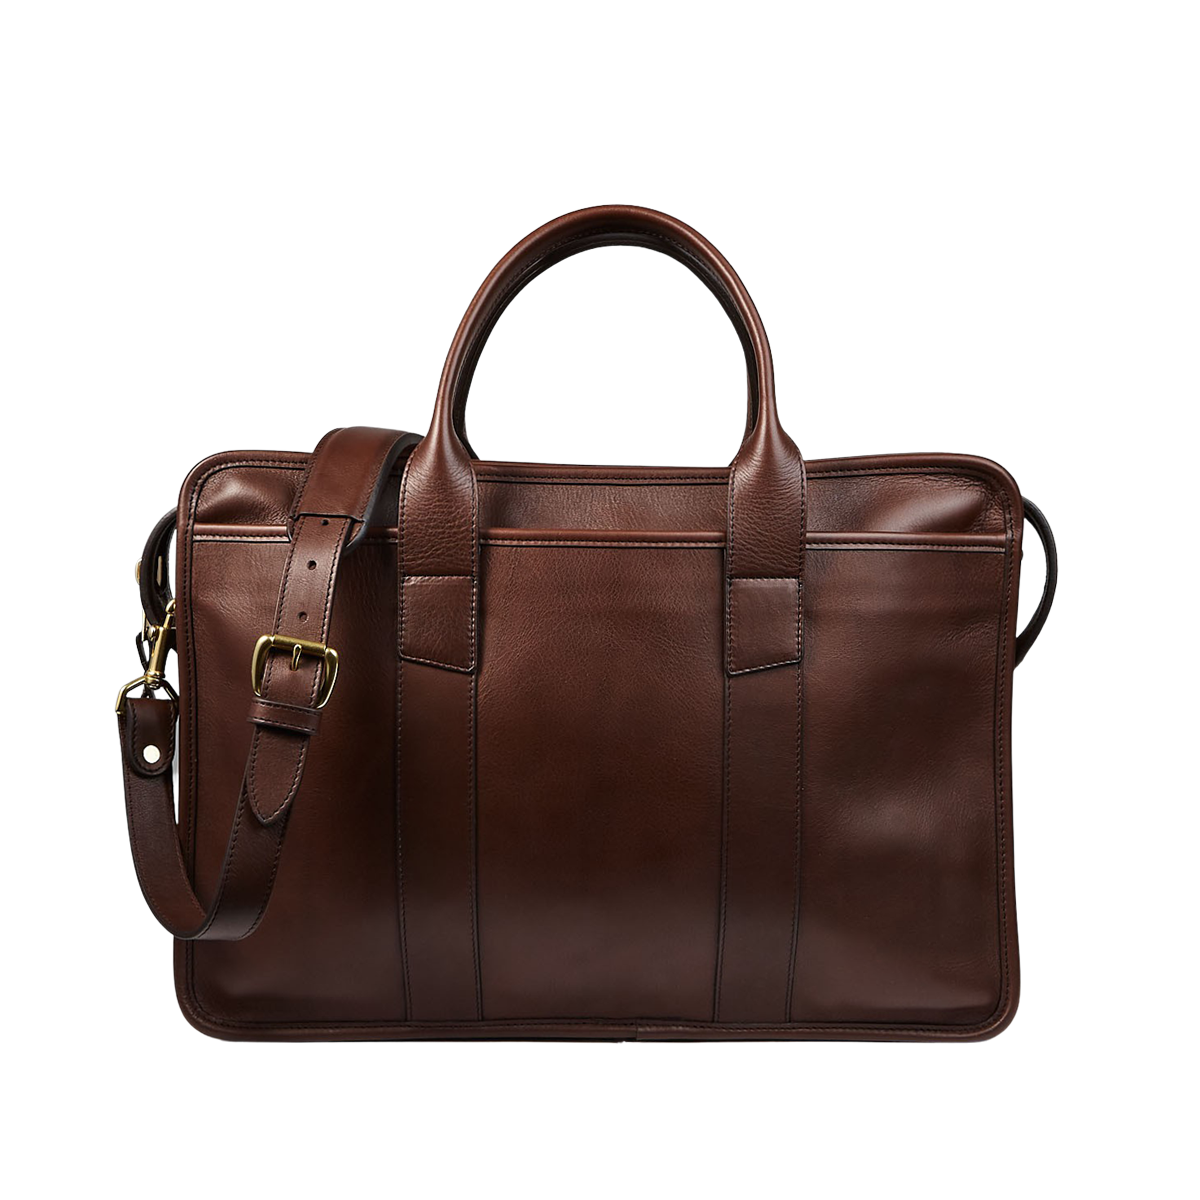 Frank Clegg Chocolate Tumbled Leather Zip-Top Briefcase Feature